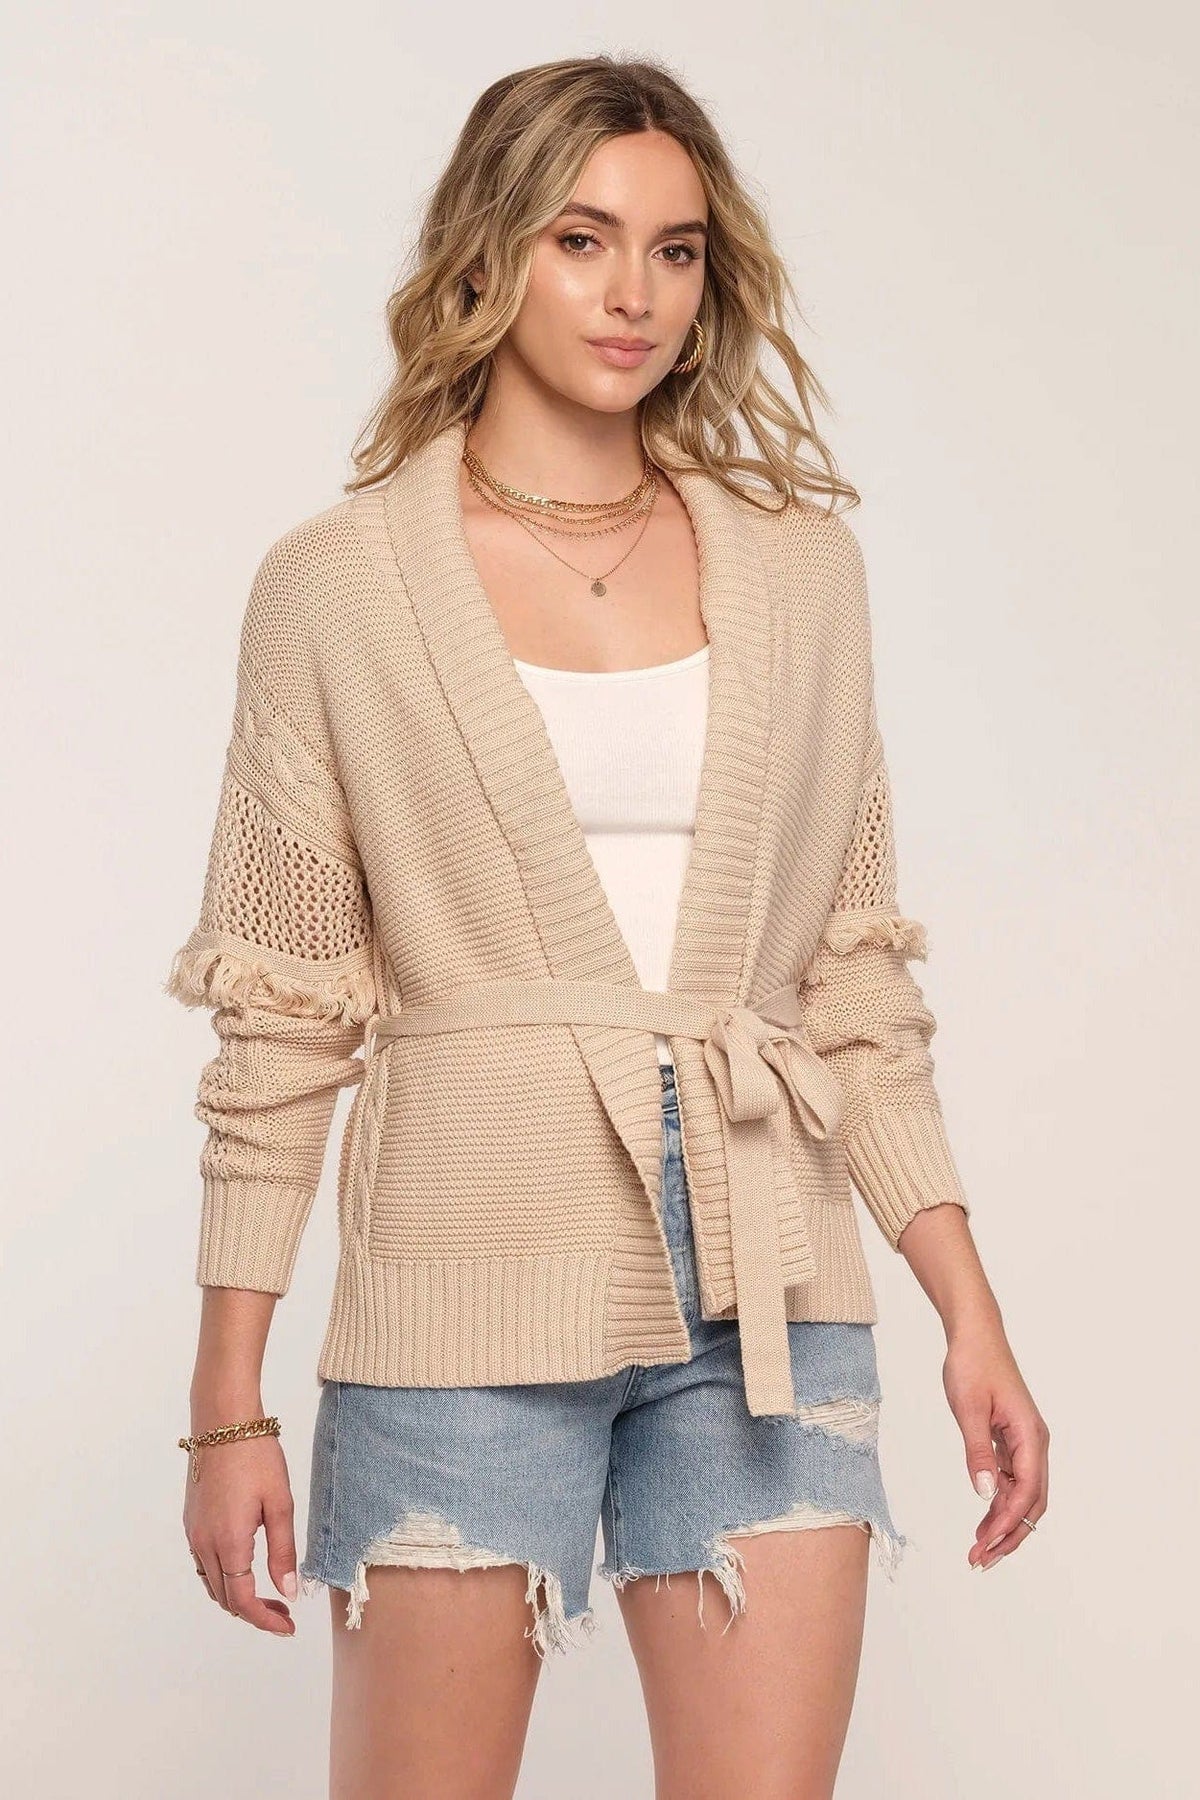 Azura Fringe Cardi in Dune by Heartloom - Shirts &amp; Tops - Blooming Daily